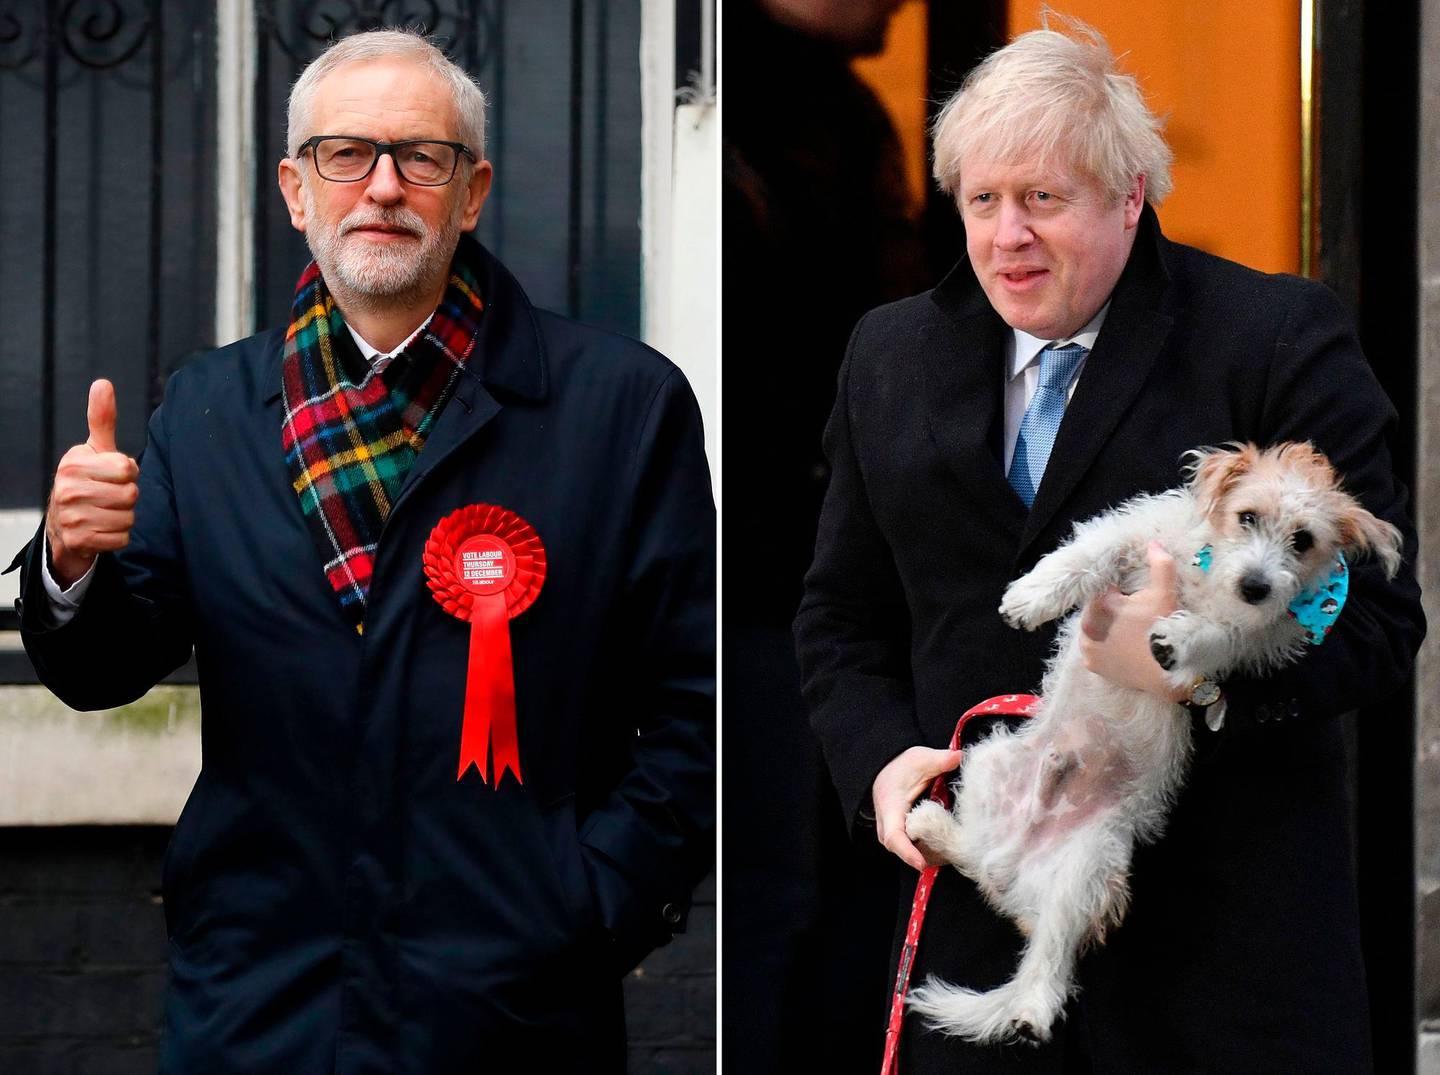 (COMBO) In this combination of photos created on December 12, 2019, Britain's Prime Minister Boris Johnson and his dog Dilyn (top), and Britain's Labour Party leader Jeremy Corbyn, are are seen as they attend Polling Stations to cast their ballot papers and vote on December 12, 2019, as Britain holds a general election. (Photo by Tolga AKMEN and Daniel LEAL-OLIVAS / AFP)